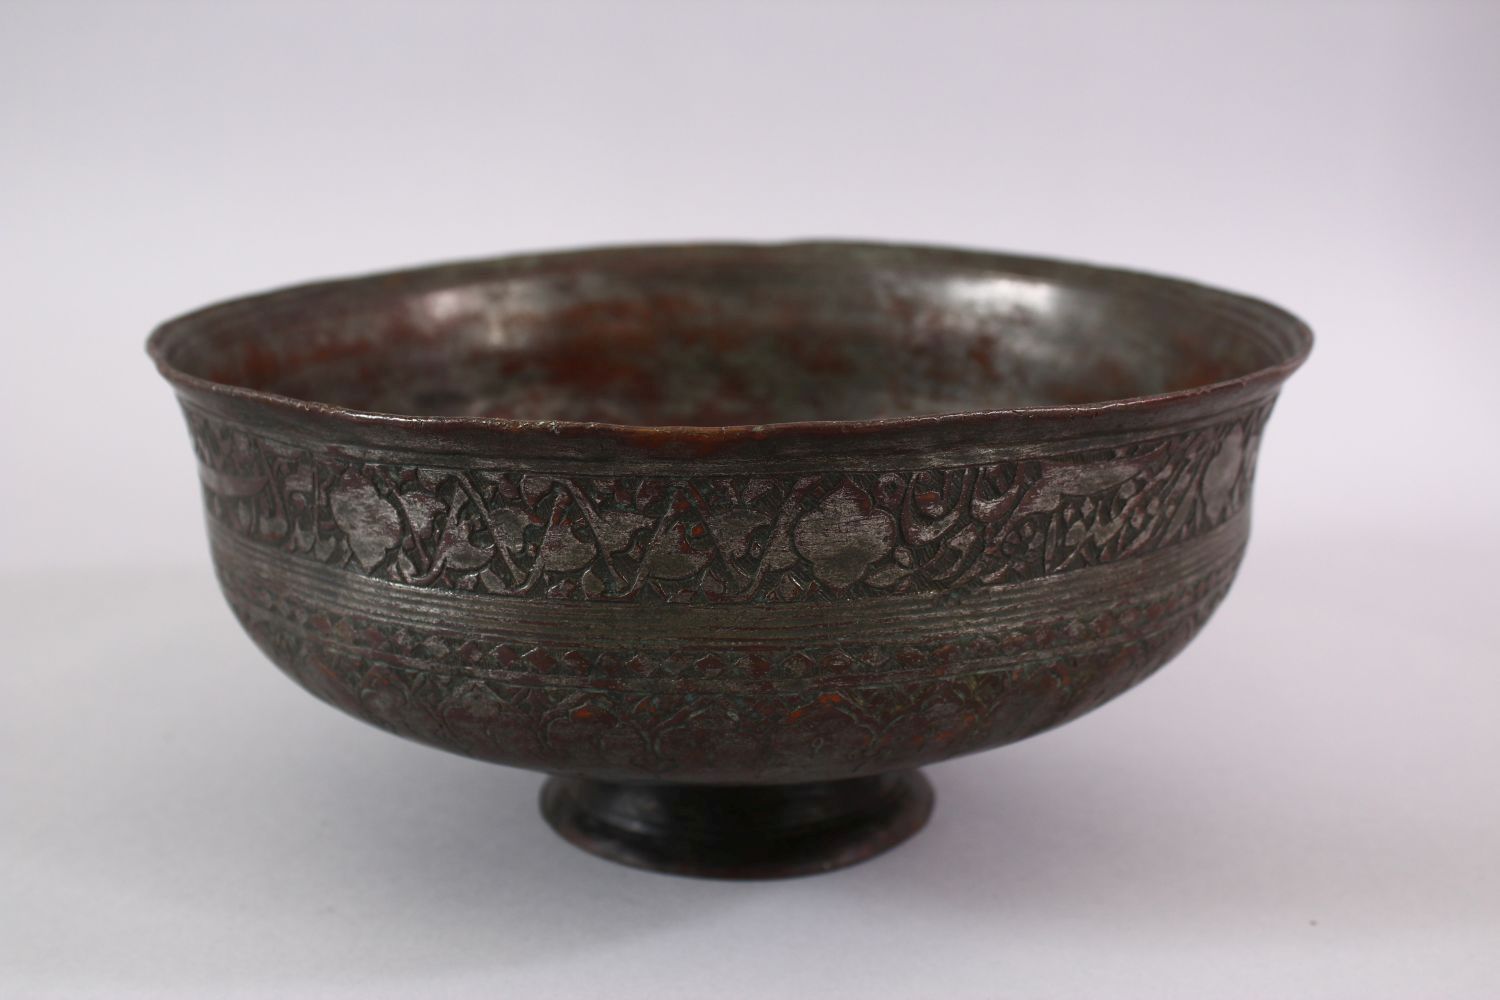 A 19TH CENTURY IRAN PERSIAN SAFAVID CALLIGRAPHIC BRONZE BOWL, with bands of calligraphy and floral - Image 3 of 6